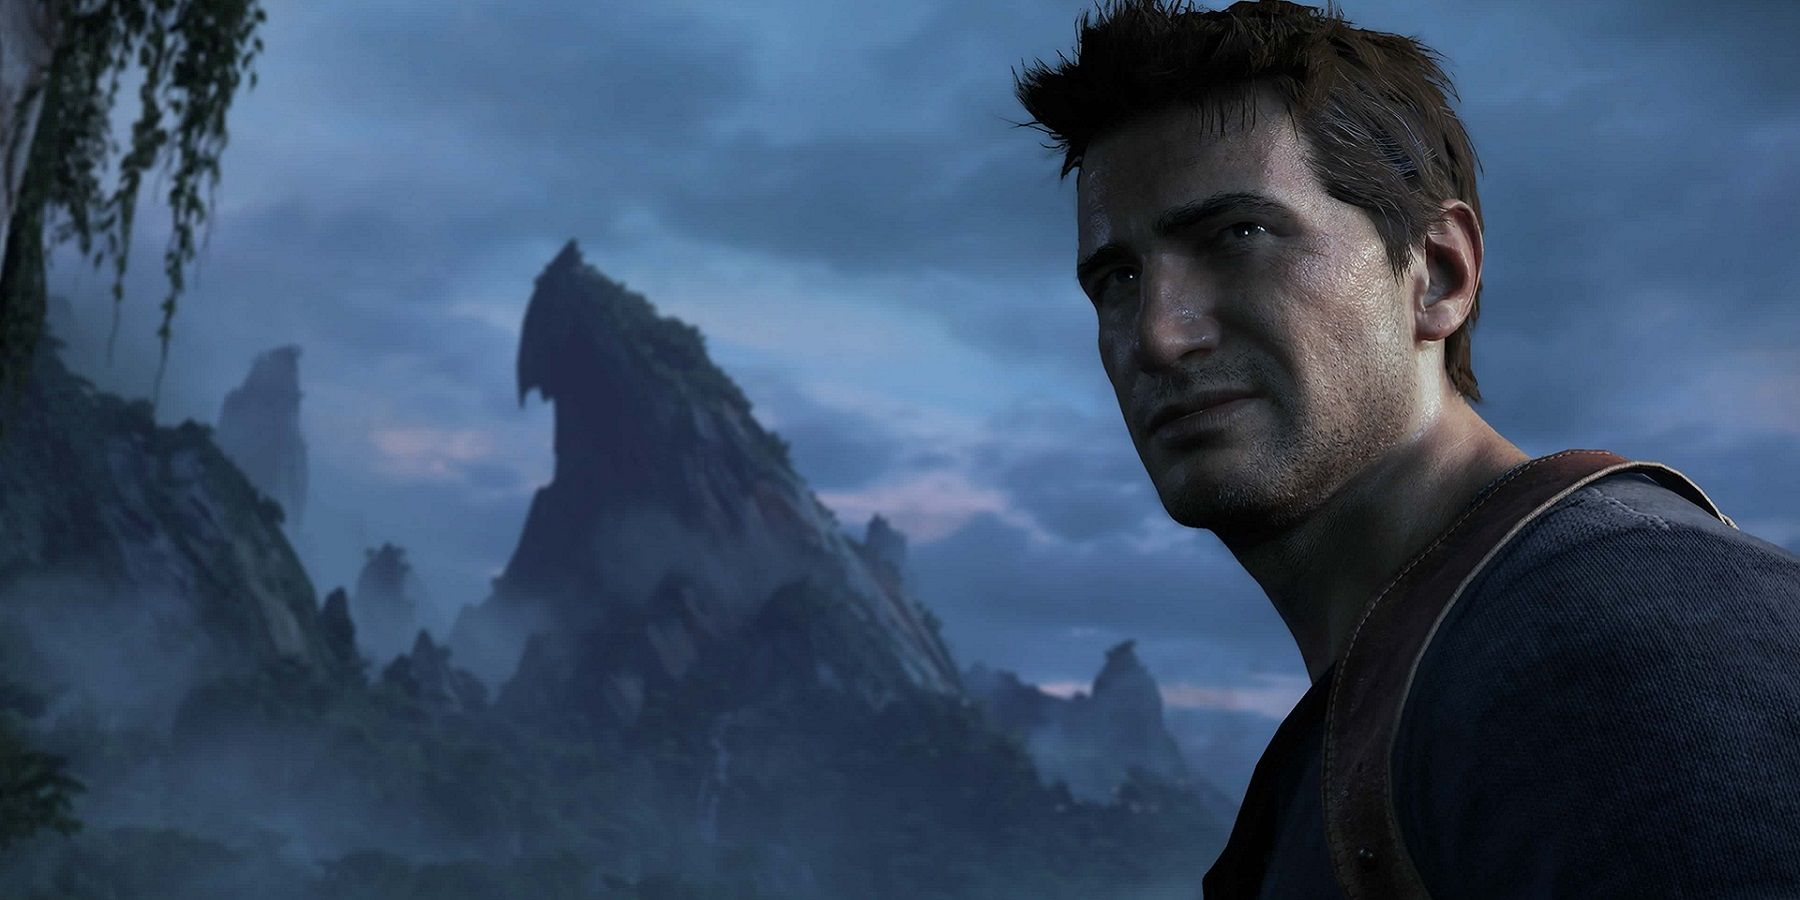 Image from Uncharted 4 showing Nathan Drake in the foreground with a gloomy mountain in the background.